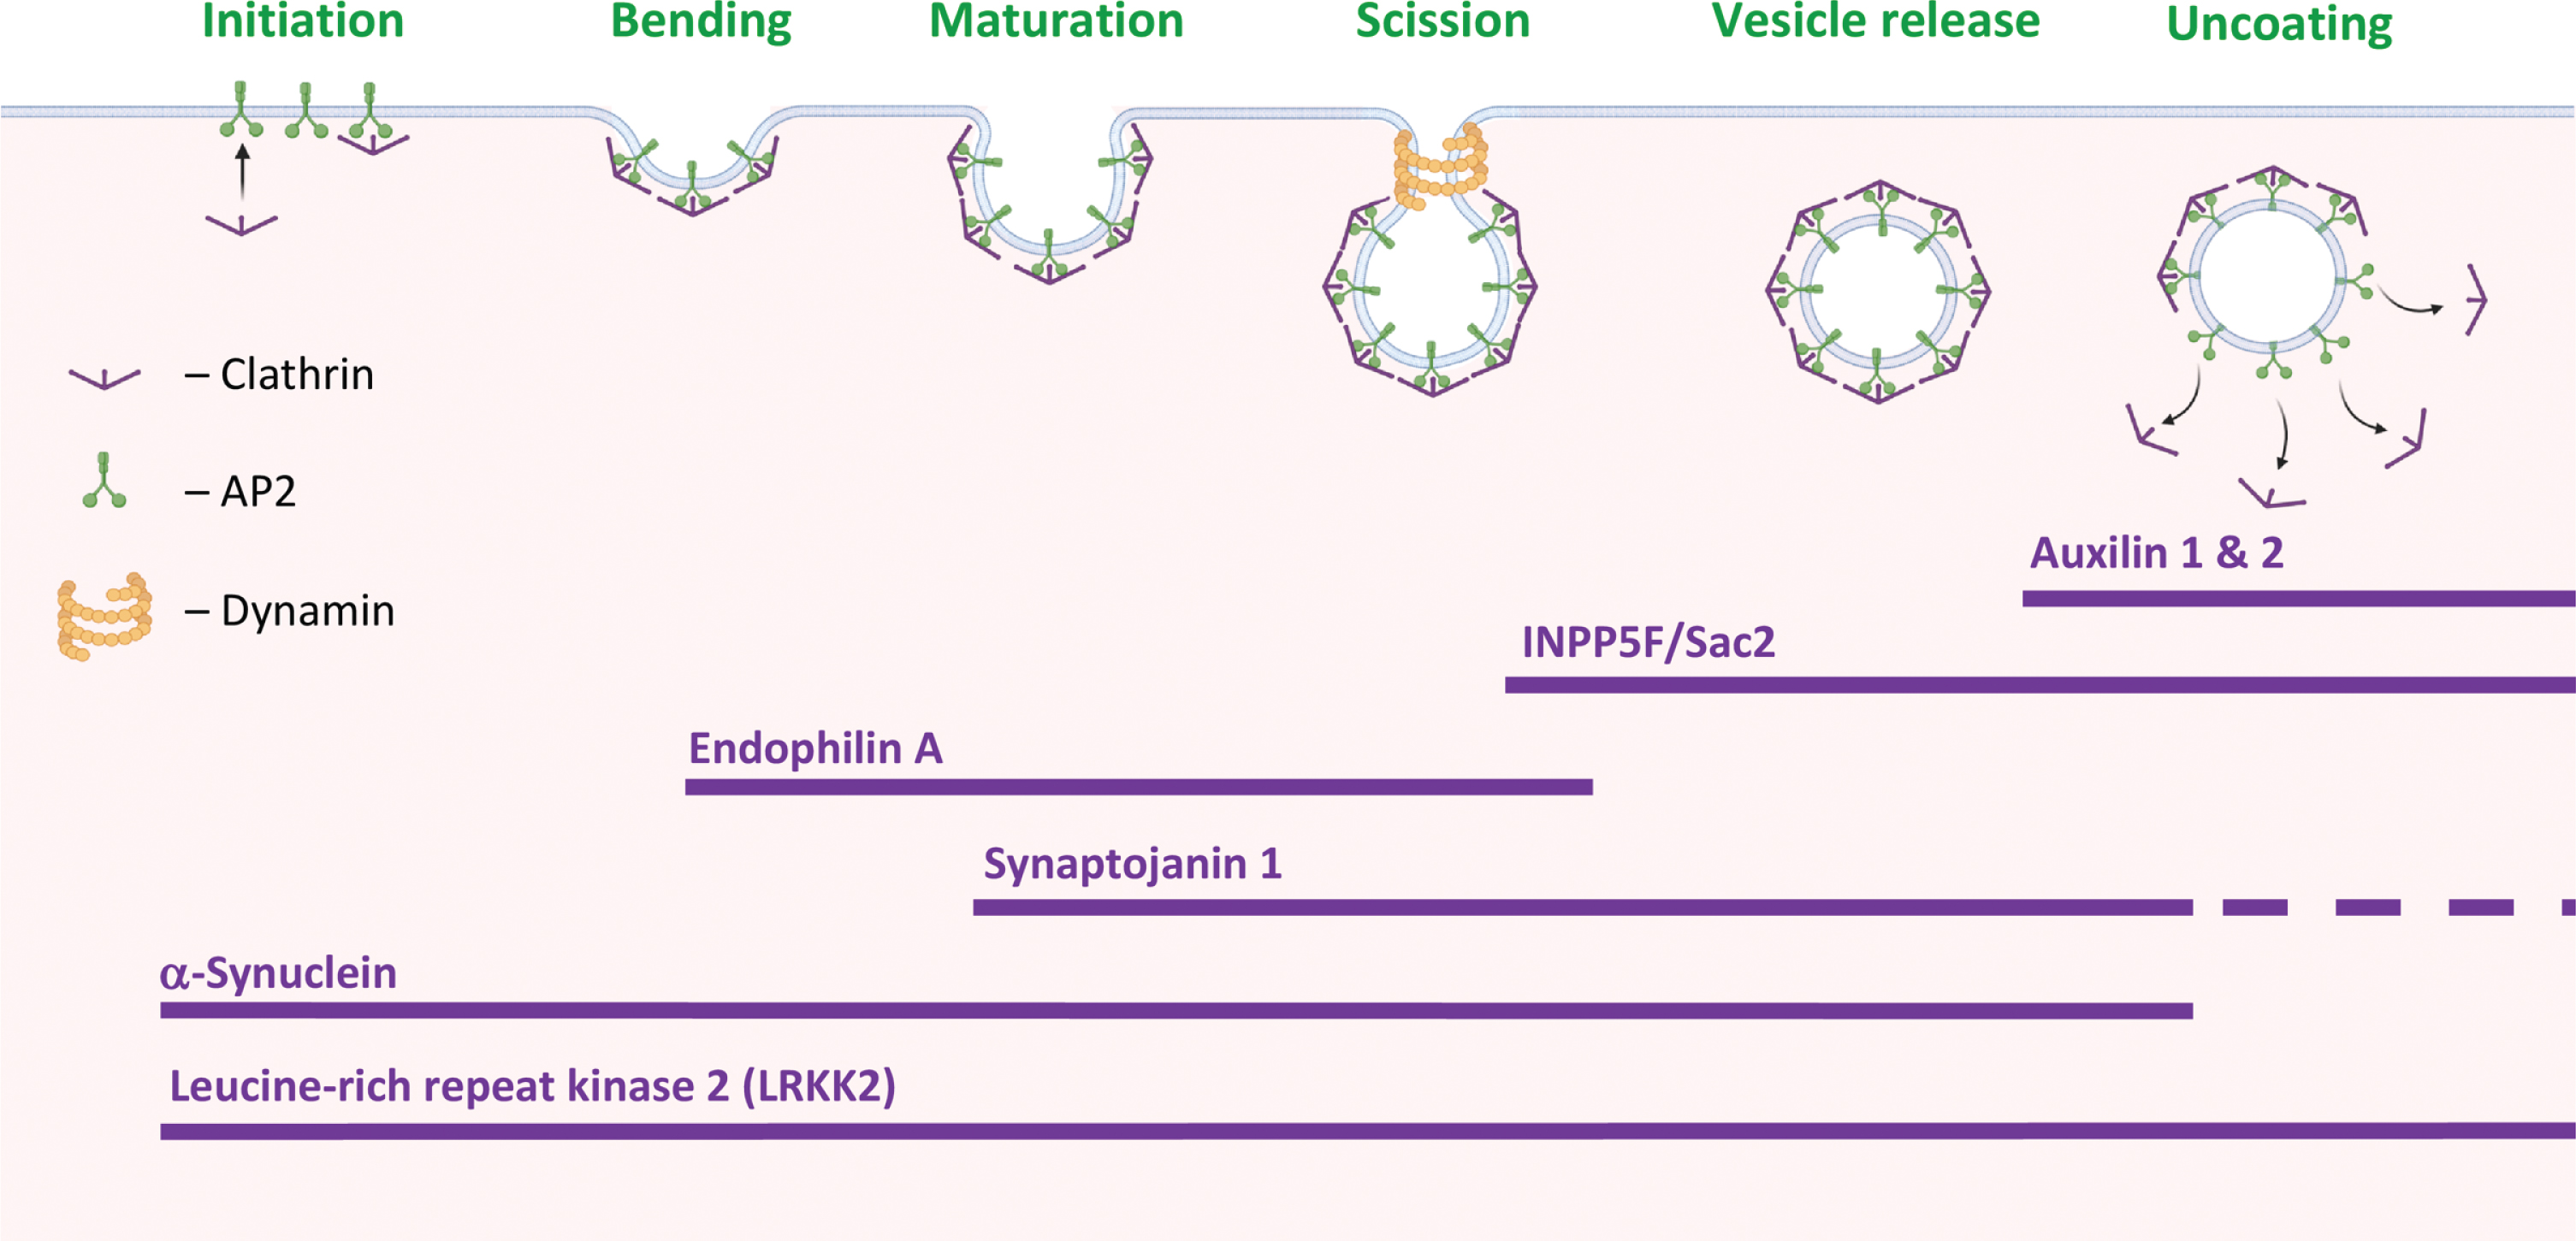 PD-proteins in clathrin-mediated endocytosis. Stages in clathrin-mediated endocytosis (CME) and the suggested involvement of PD-associated proteins at specific stages of the process. Created with BioRender.com.